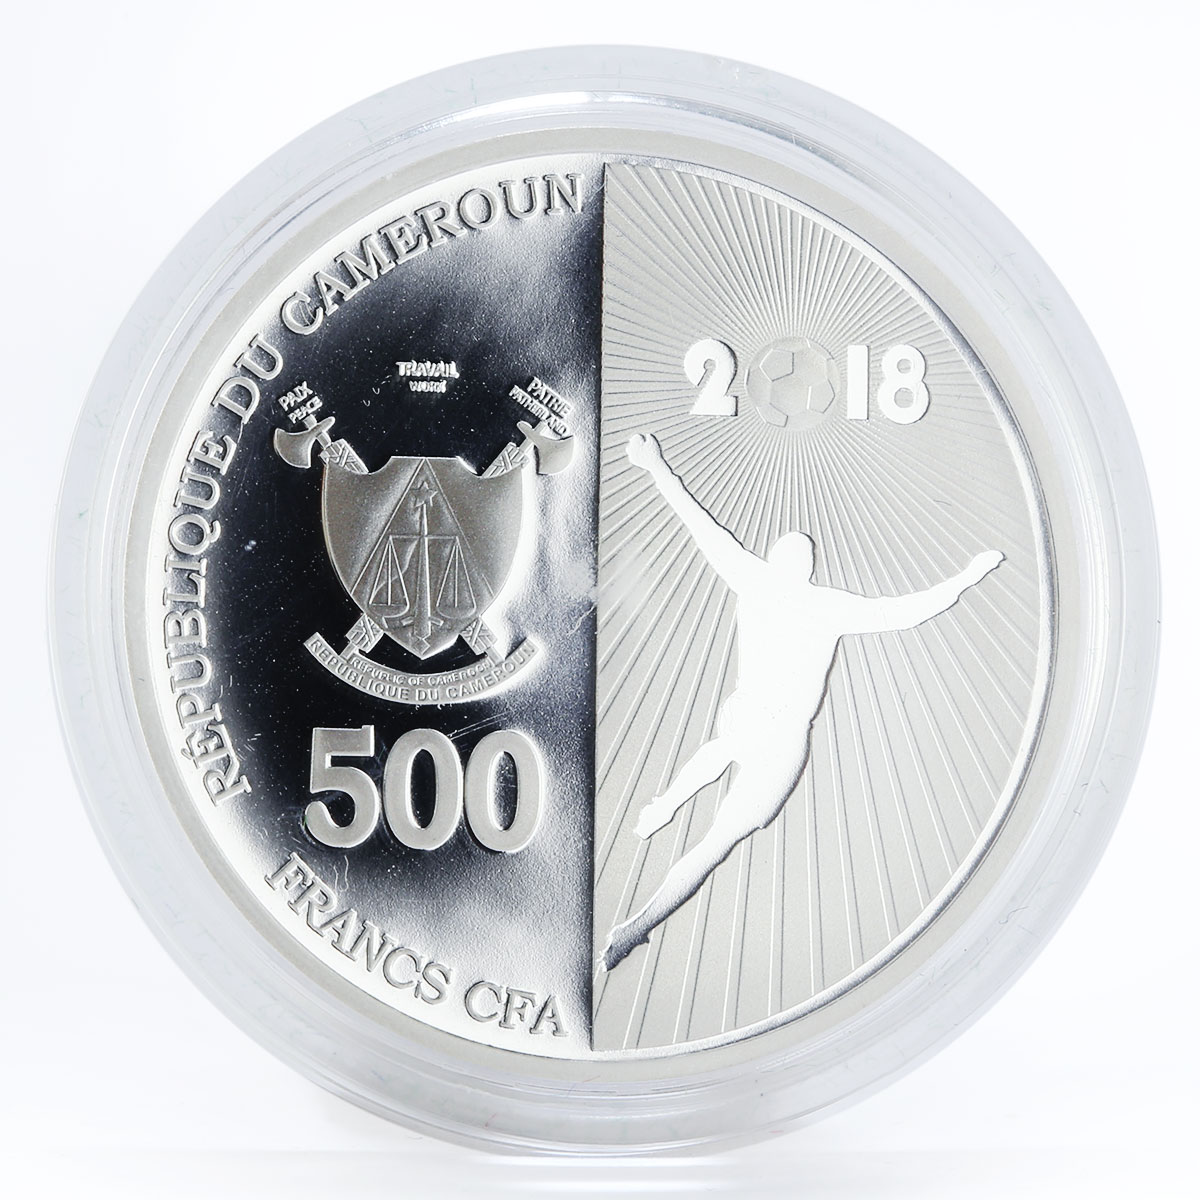 Cameroon 500 francs Football goalkeeper sport proof silver coin 2018